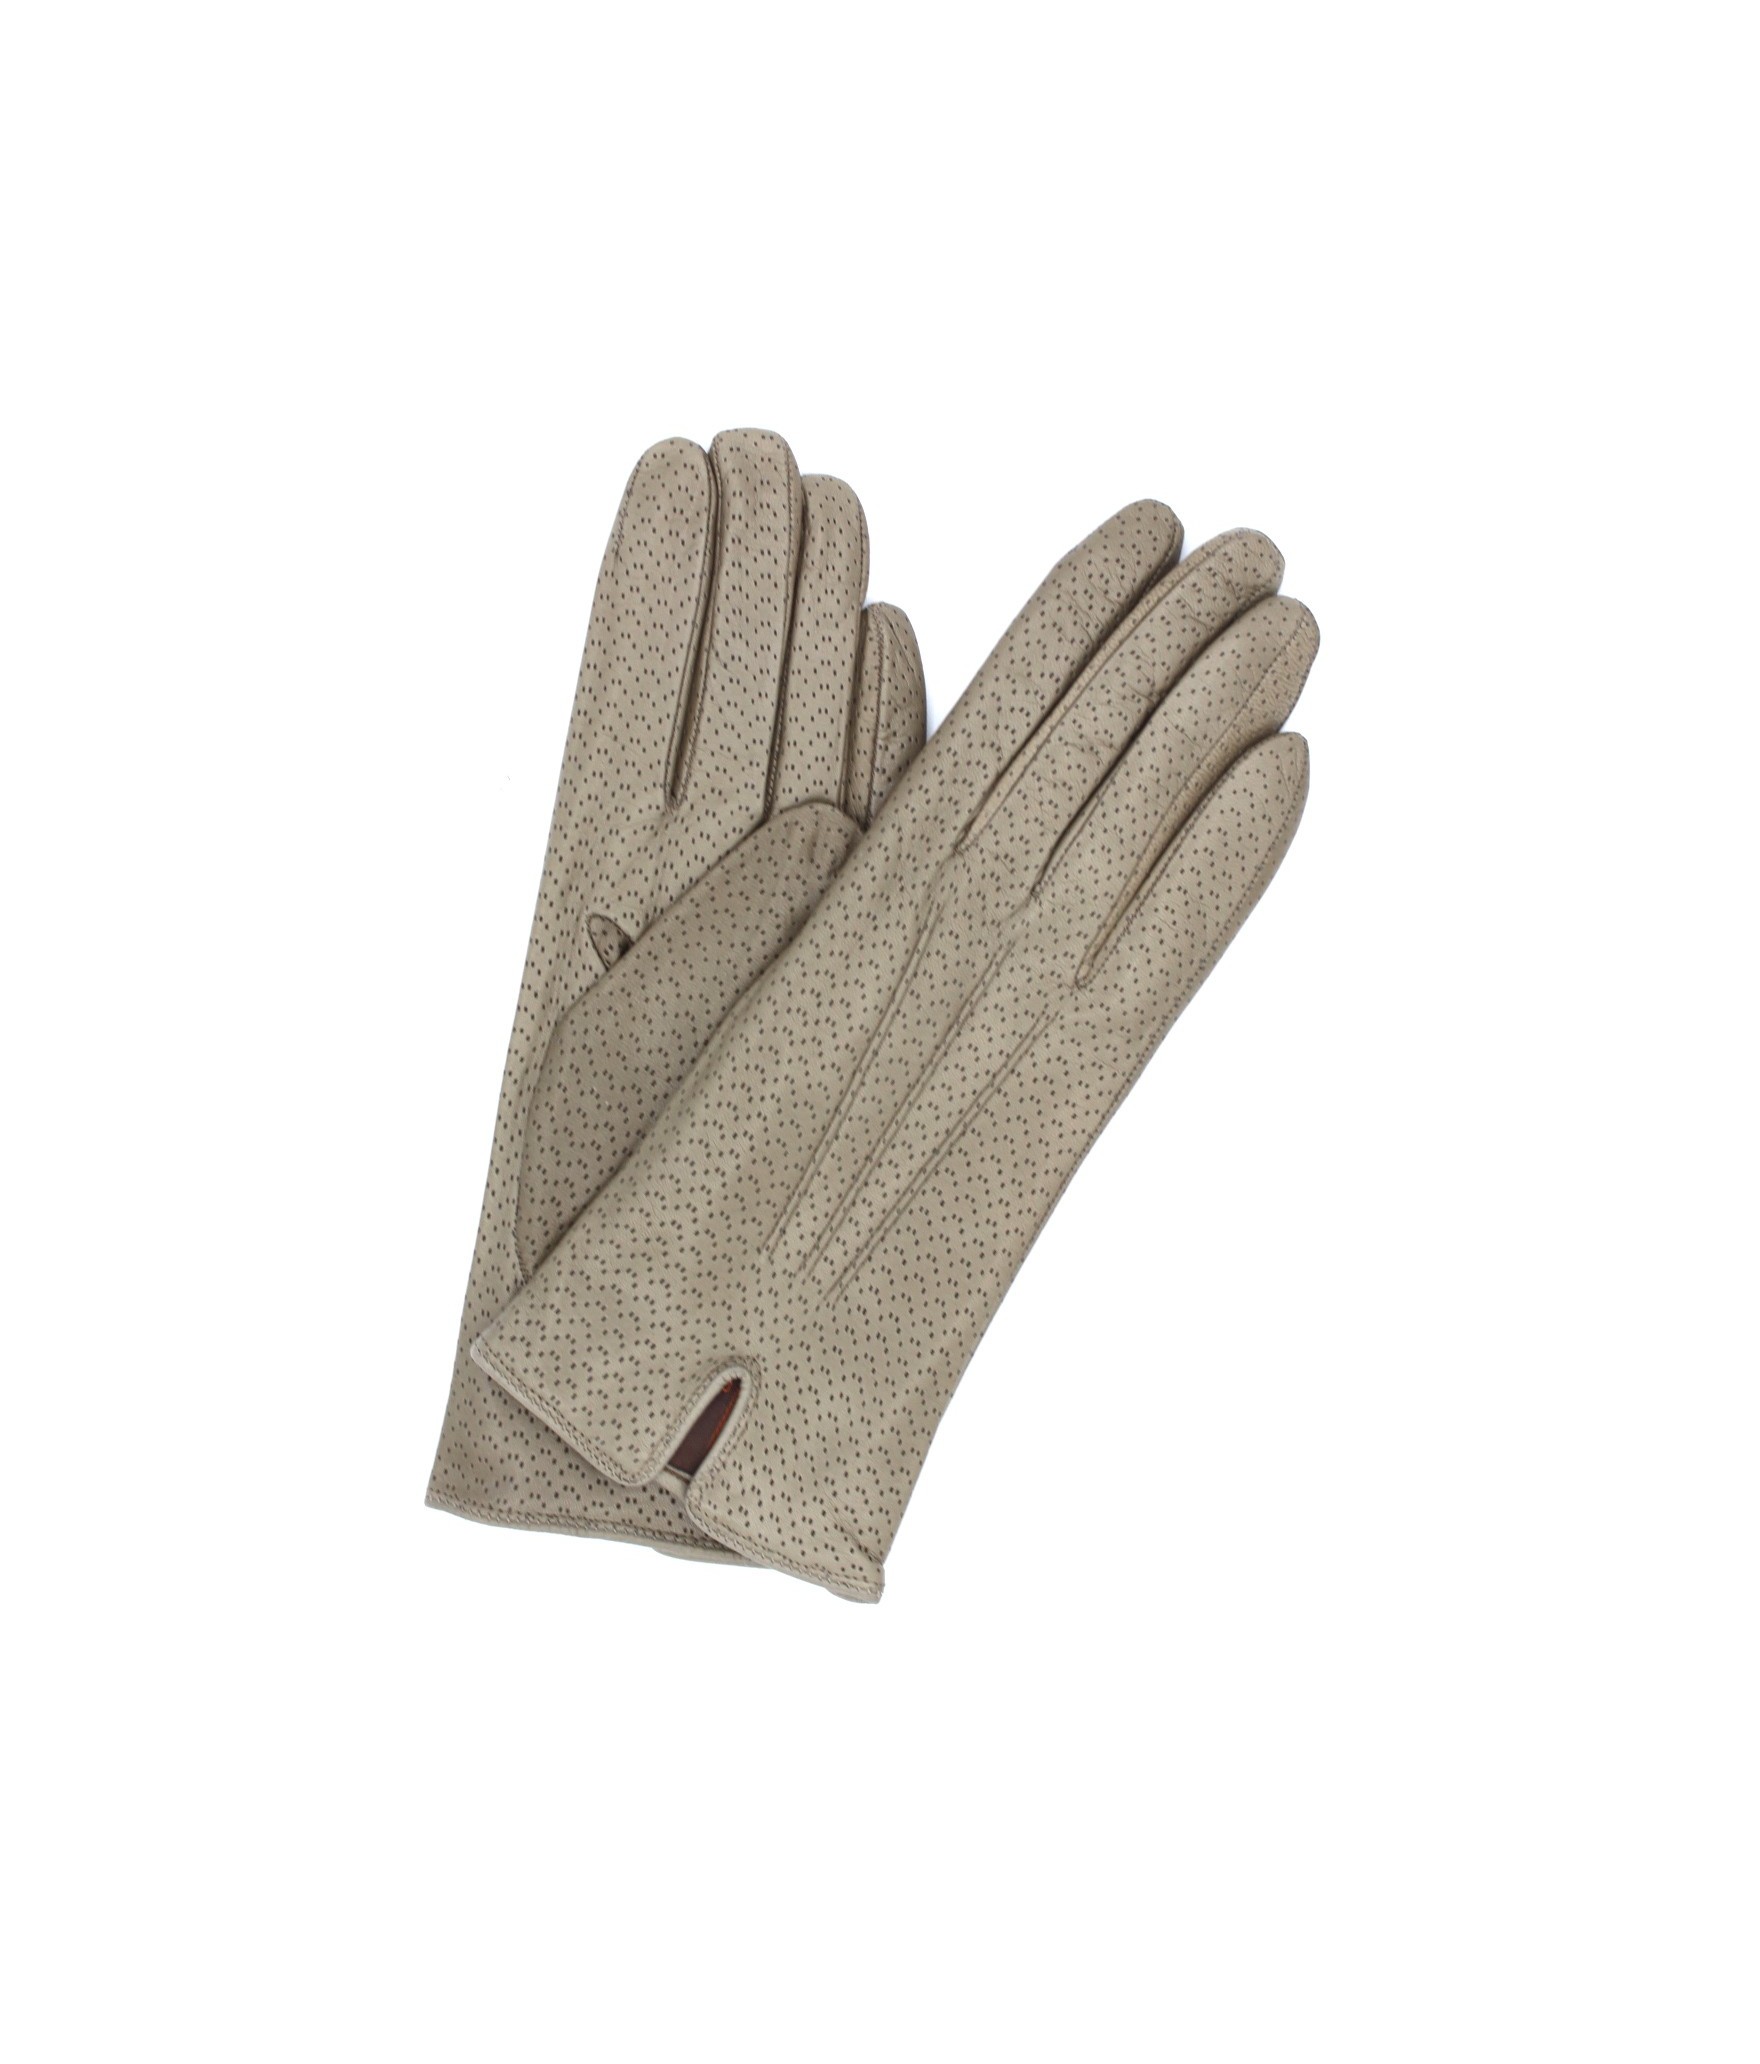 1922 Kid Leather Gloves Cashmere Lined Perf. Taupe 